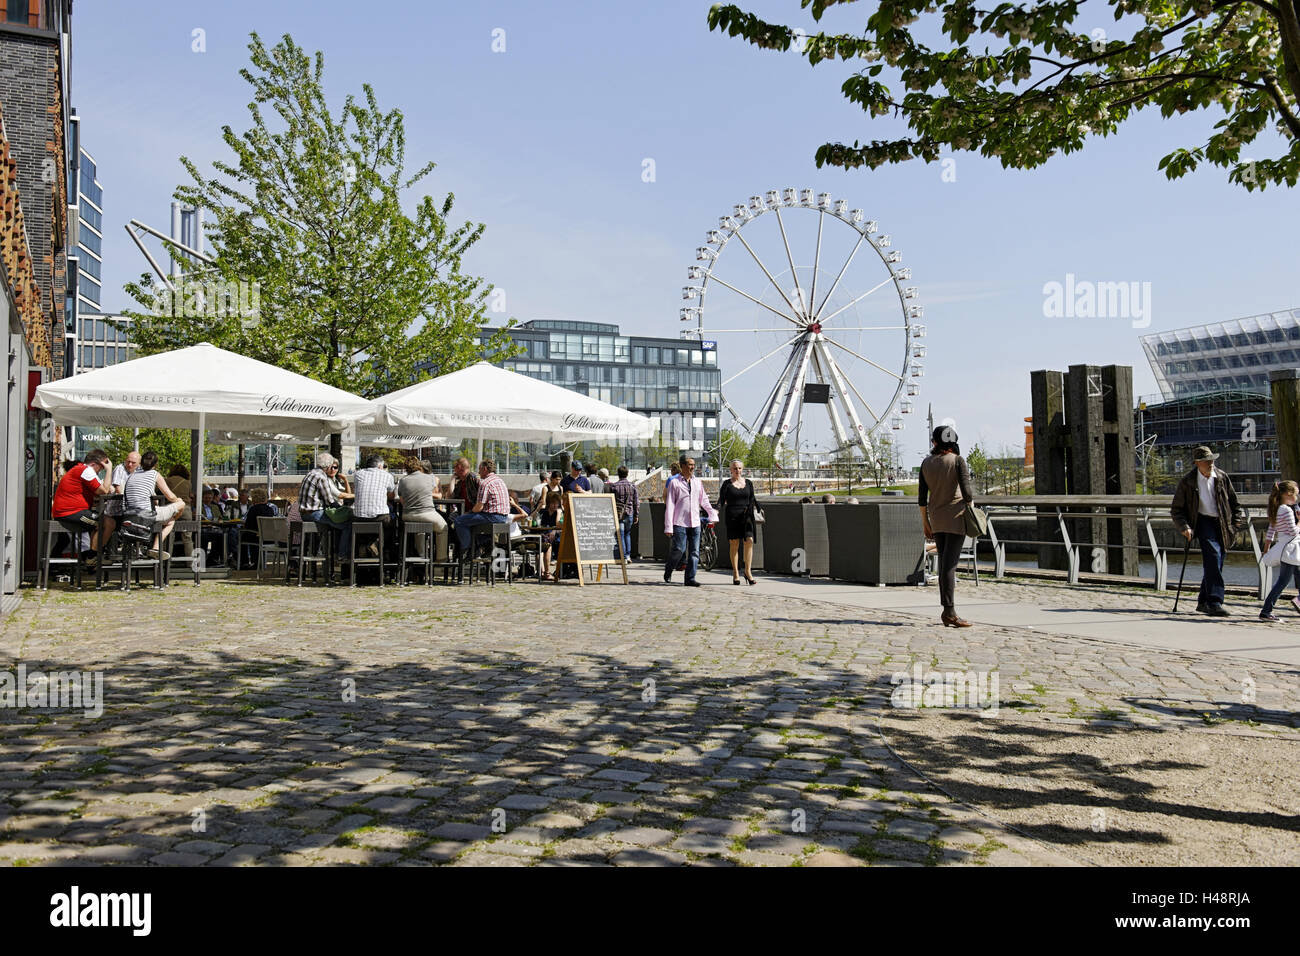 Stroll in the imperial quay, close rest, harbour city, Hamburg, Germany, Europe, Stock Photo